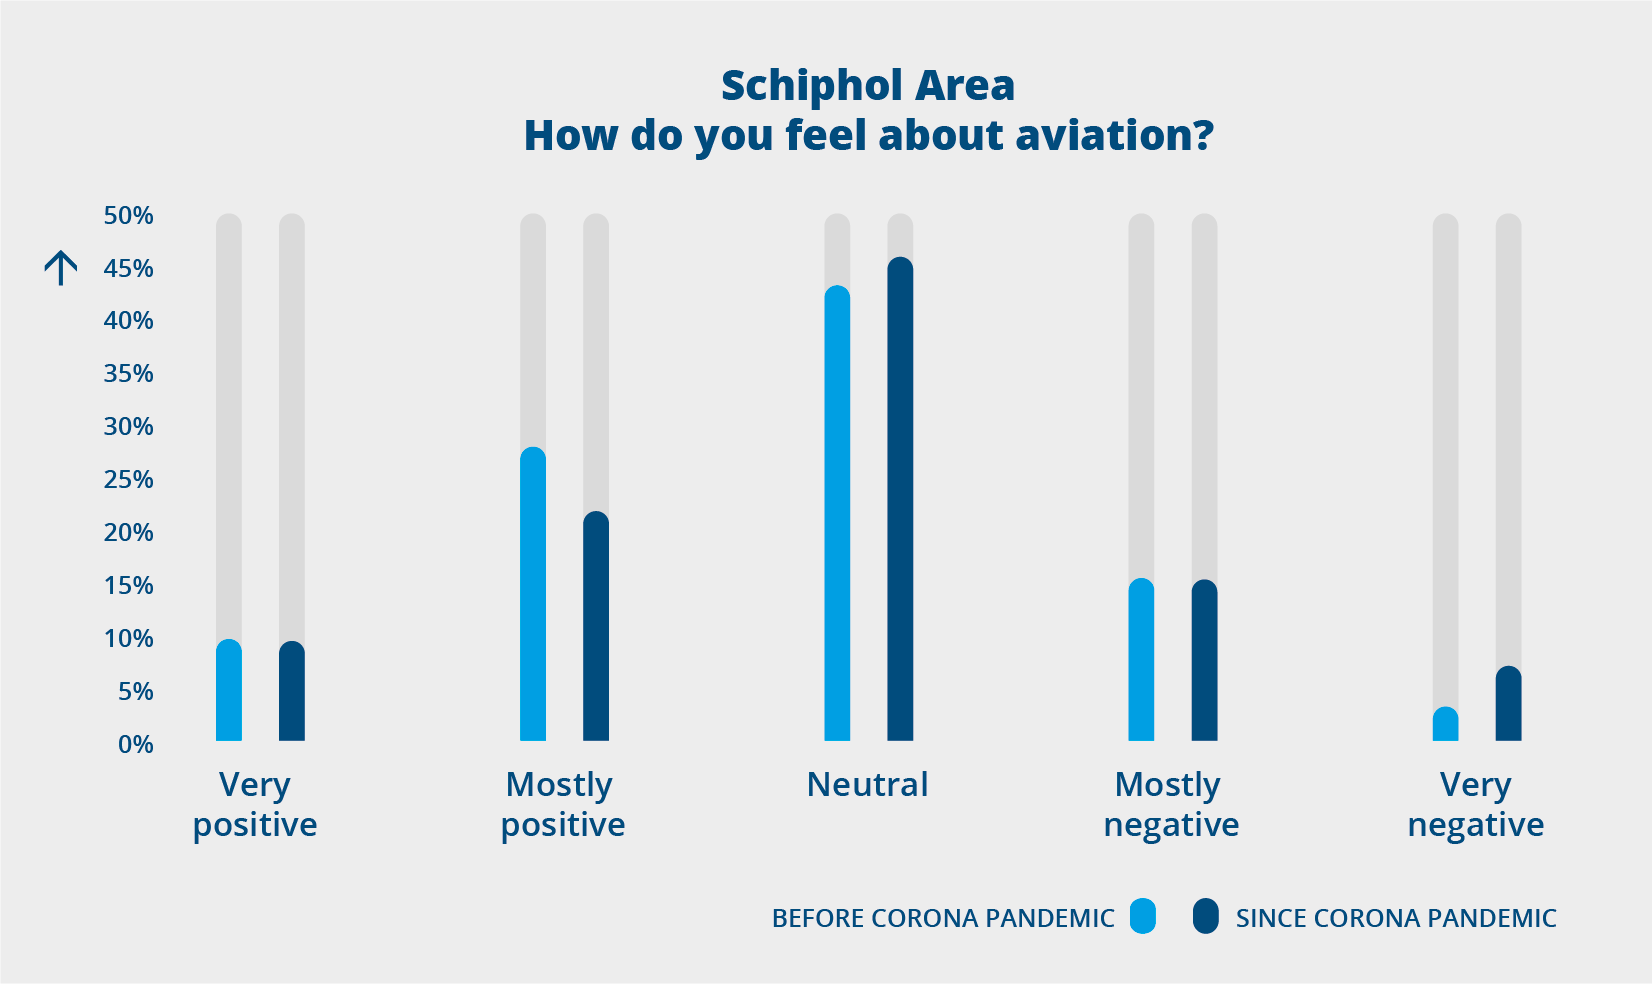 Schiphol area: How do you feel about aviation?